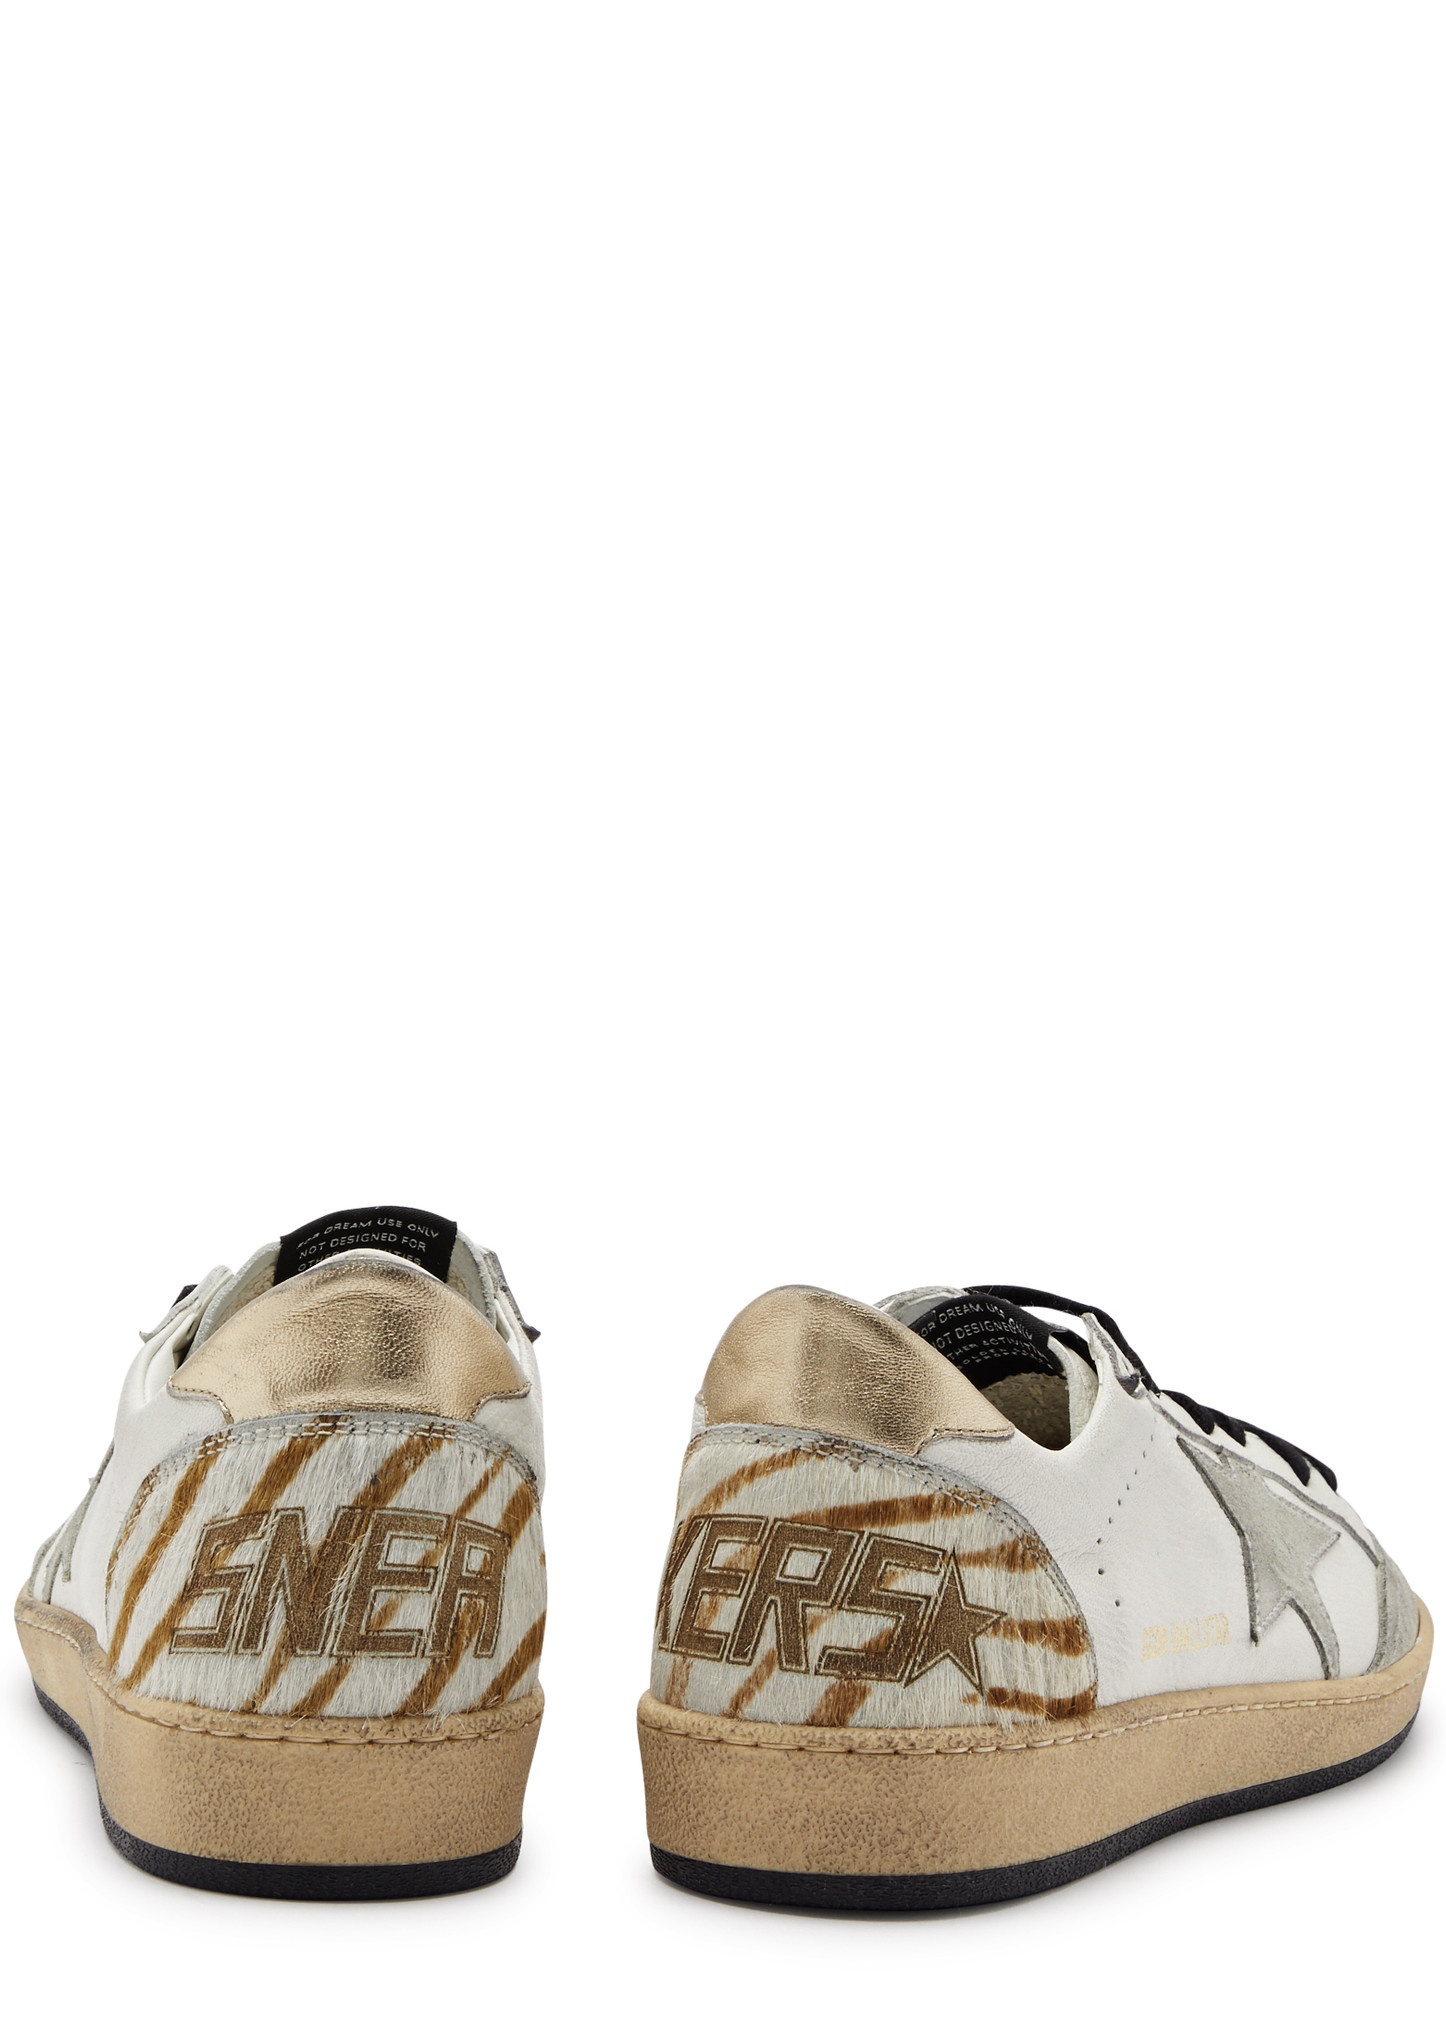 Ball Star distressed leather sneakers - 3